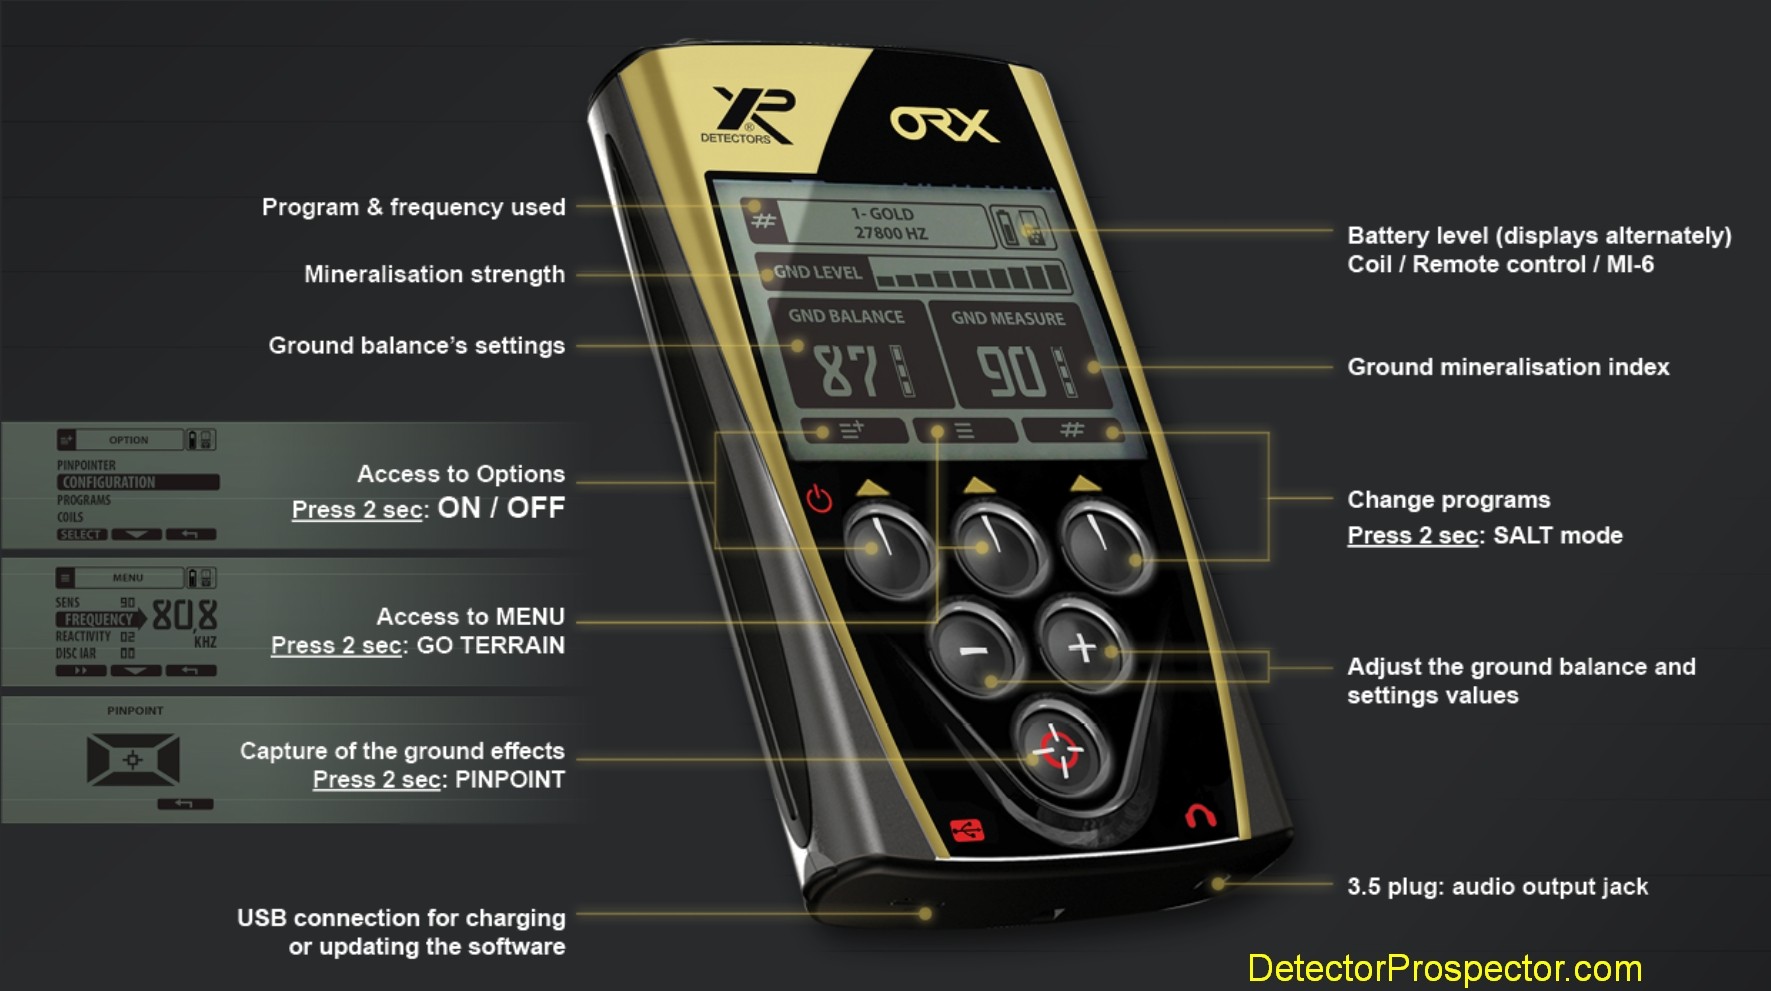 new-xp-orx-metal-detector-gold-nugget-se